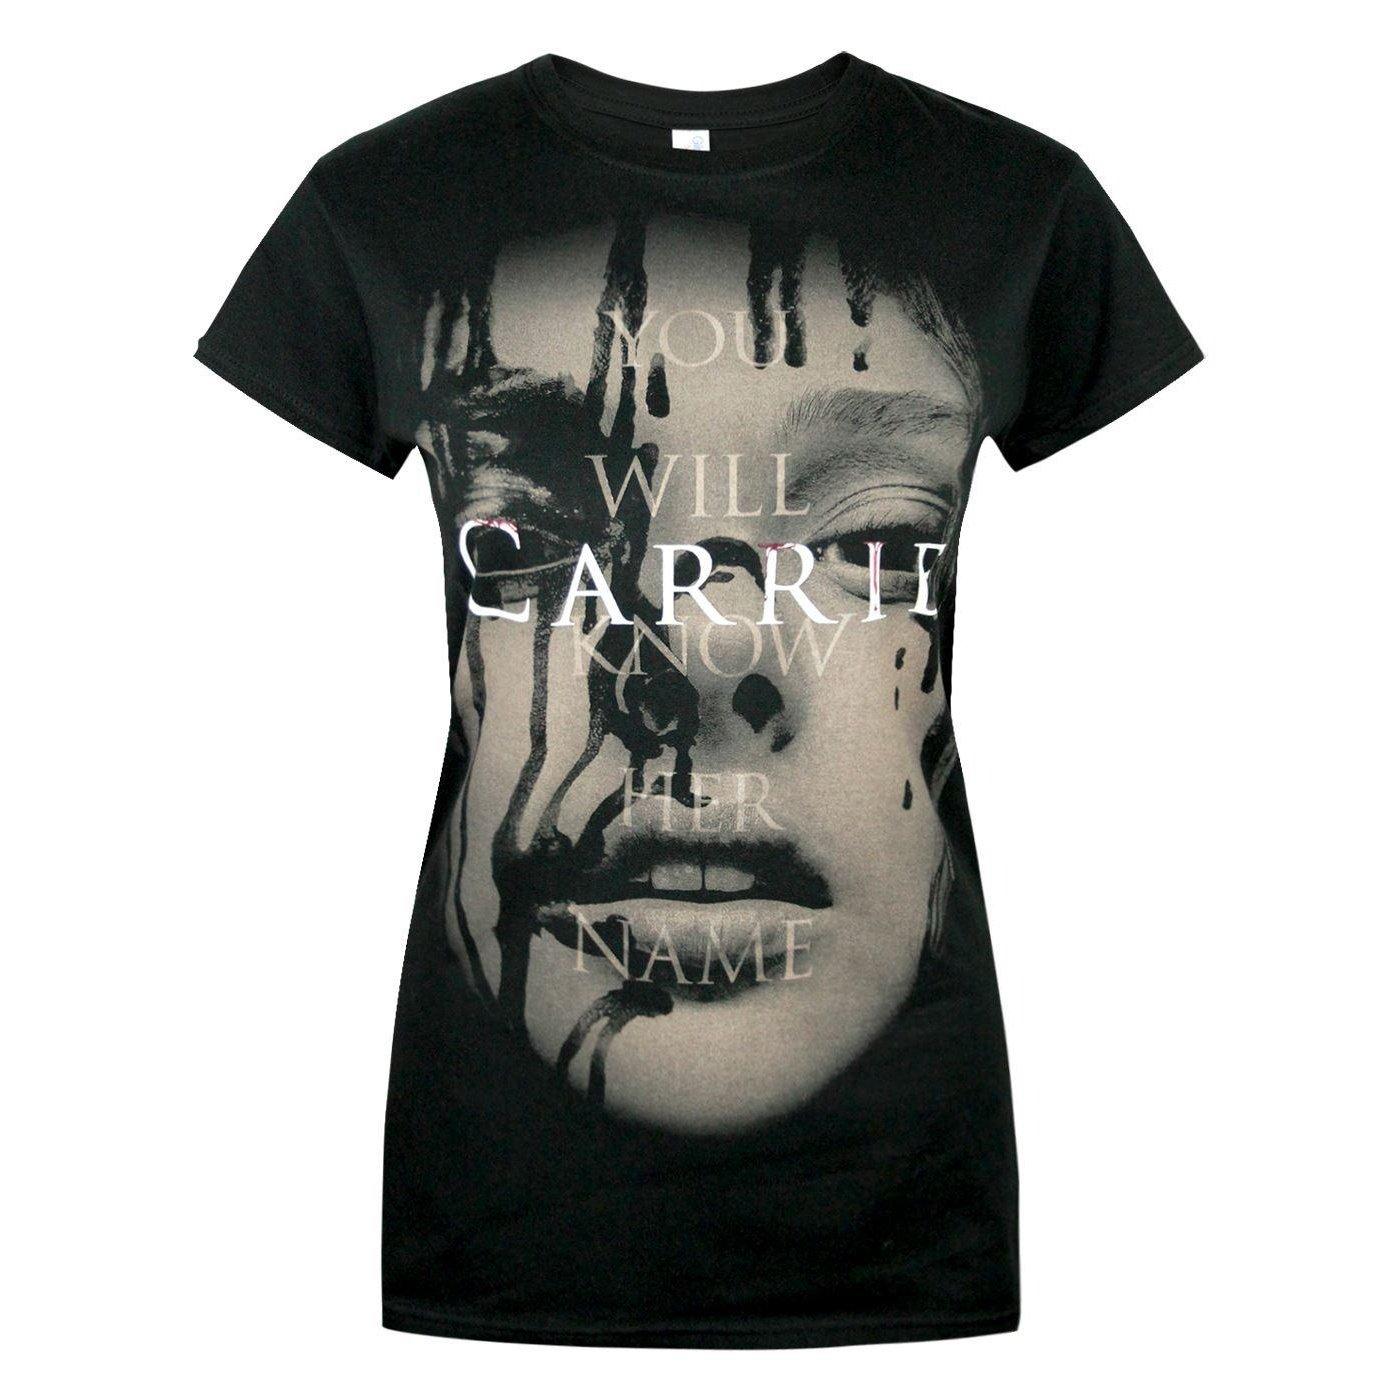 Image of Carrie The Movie 2013 TShirt - L